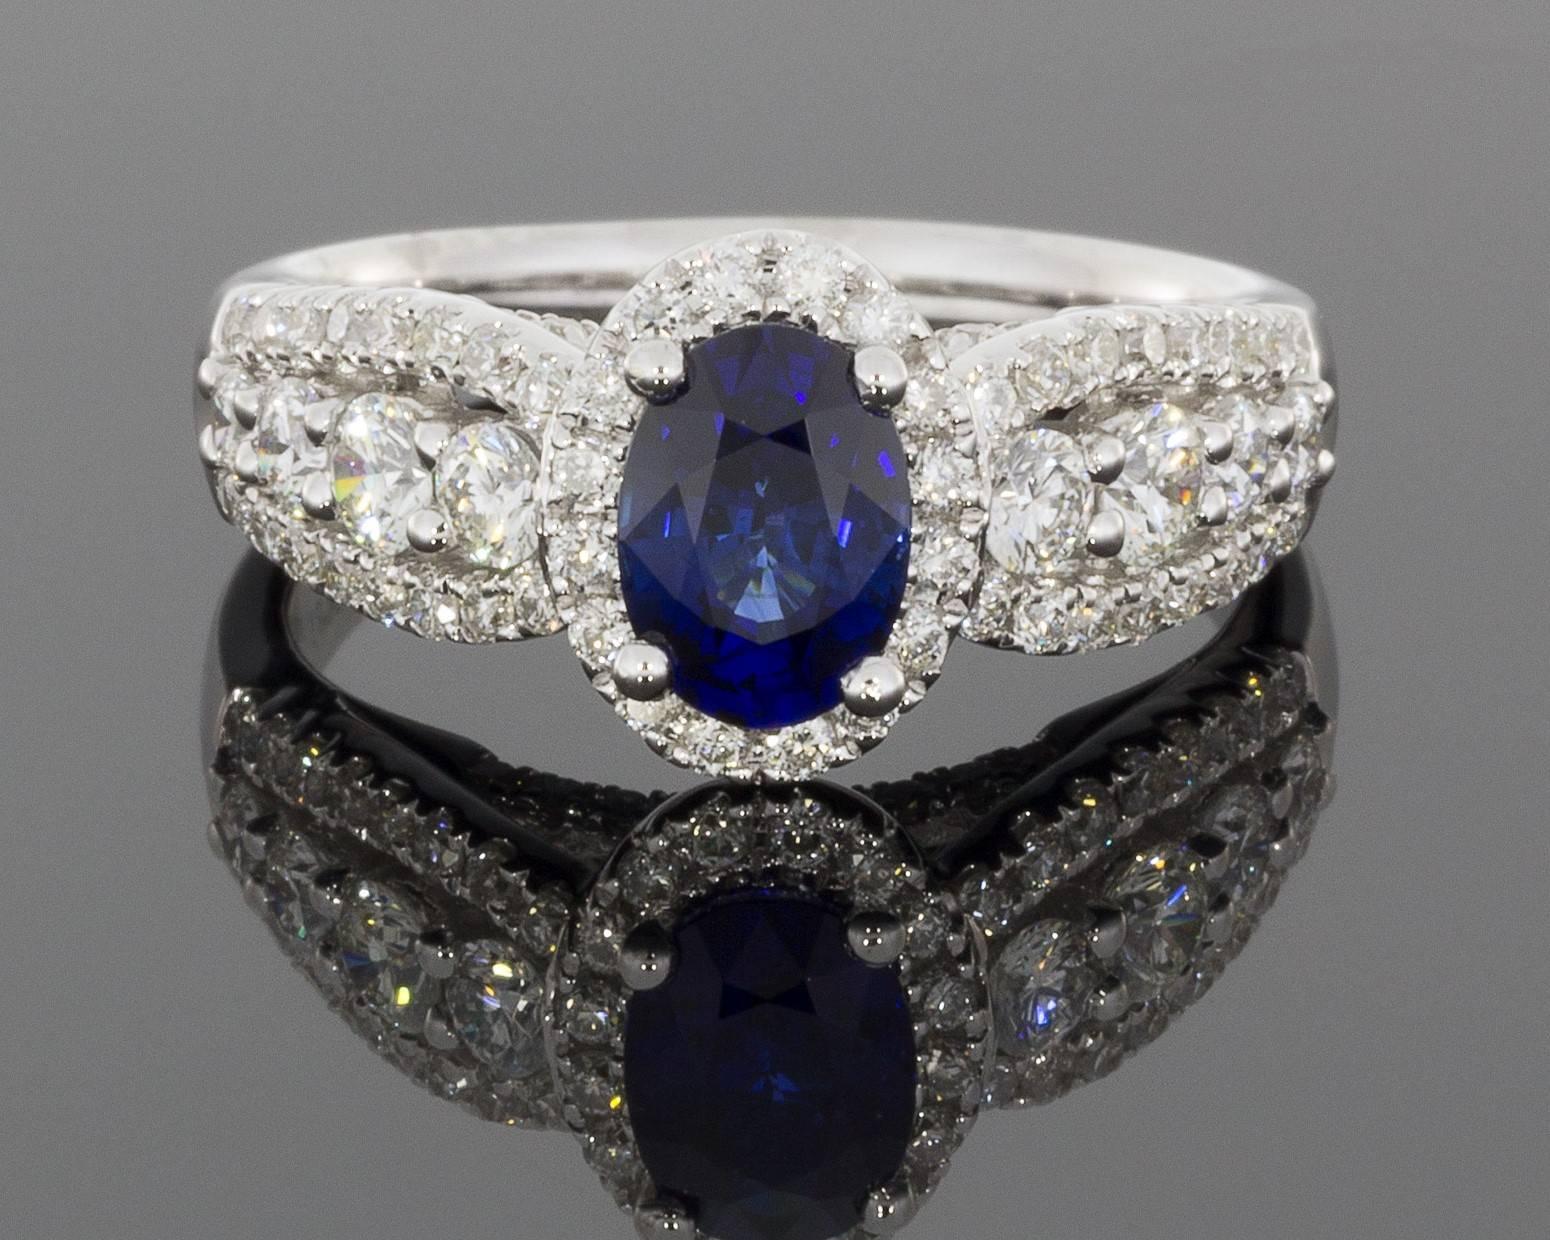 This breathtaking ring features a beautiful, 1.10 carat, natural, oval cut, blue sapphire. This gorgeous sapphire has exceptionally beautiful blue color that can hardly be captured by pictures. It is prong set in an 18 karat white gold halo ring.